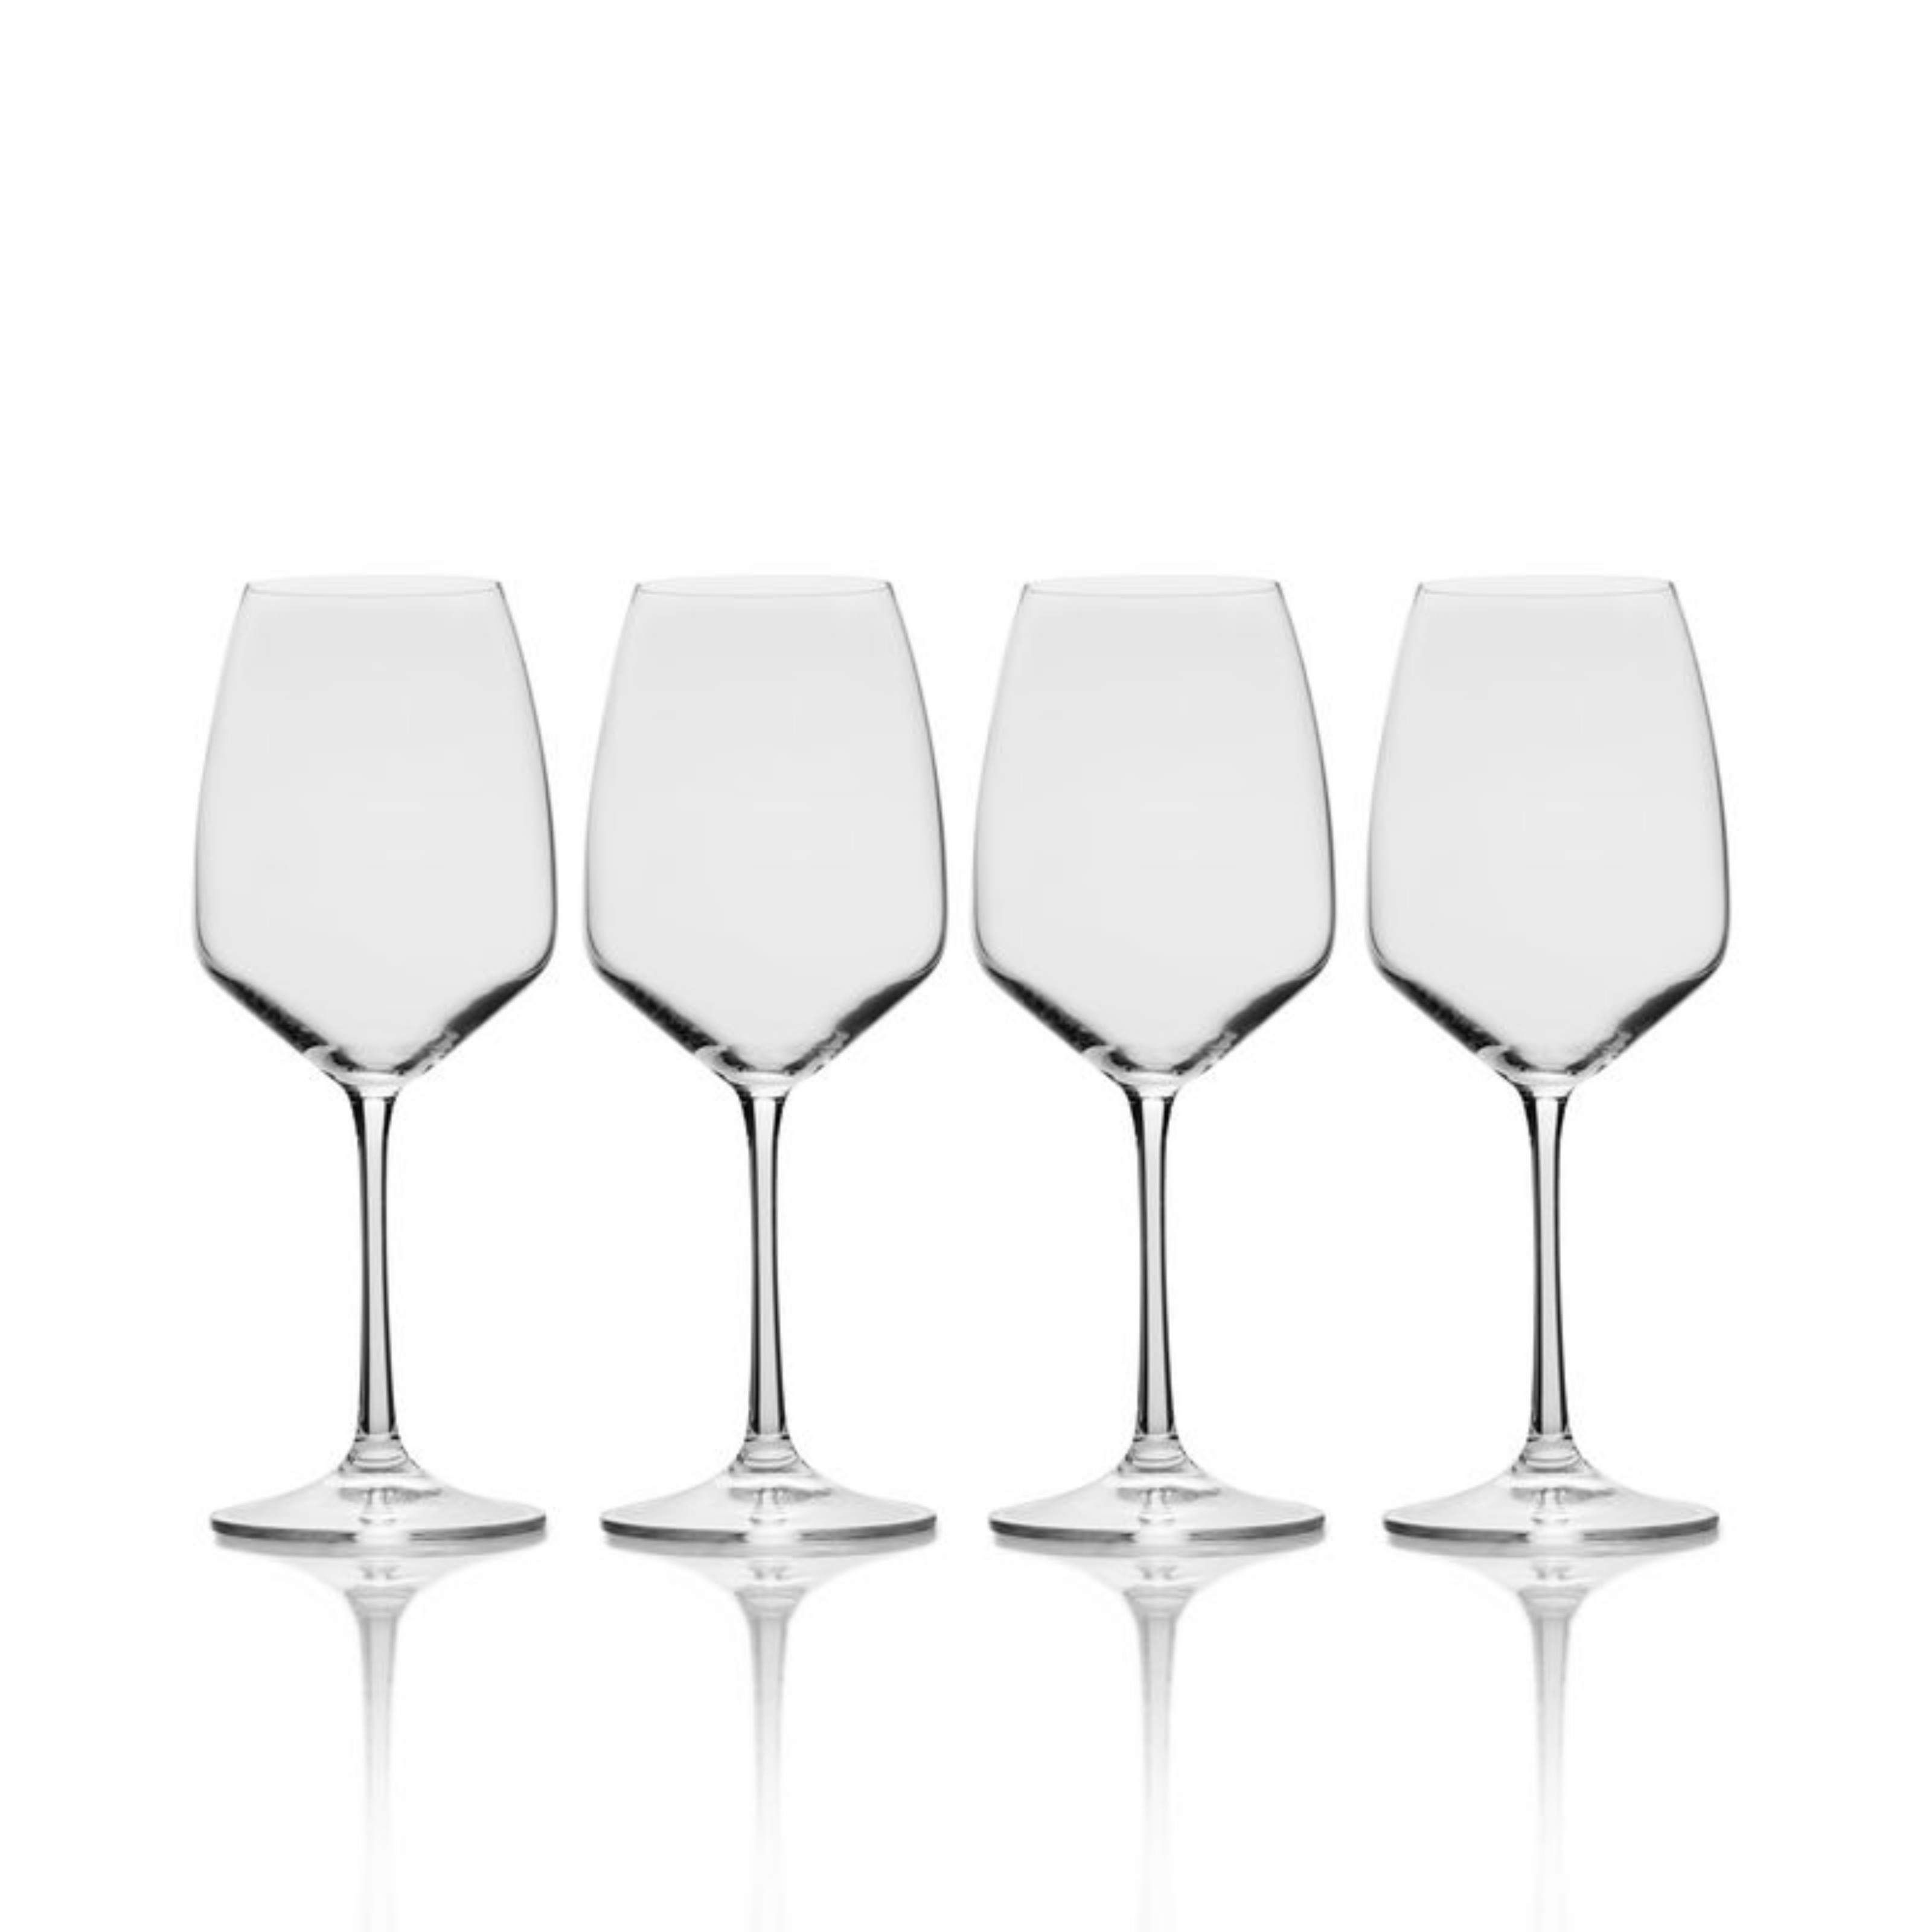 Mikasa Aline Stemless Wine Double Old Fashioned Glasses Set of 4, 14 oz - Clear